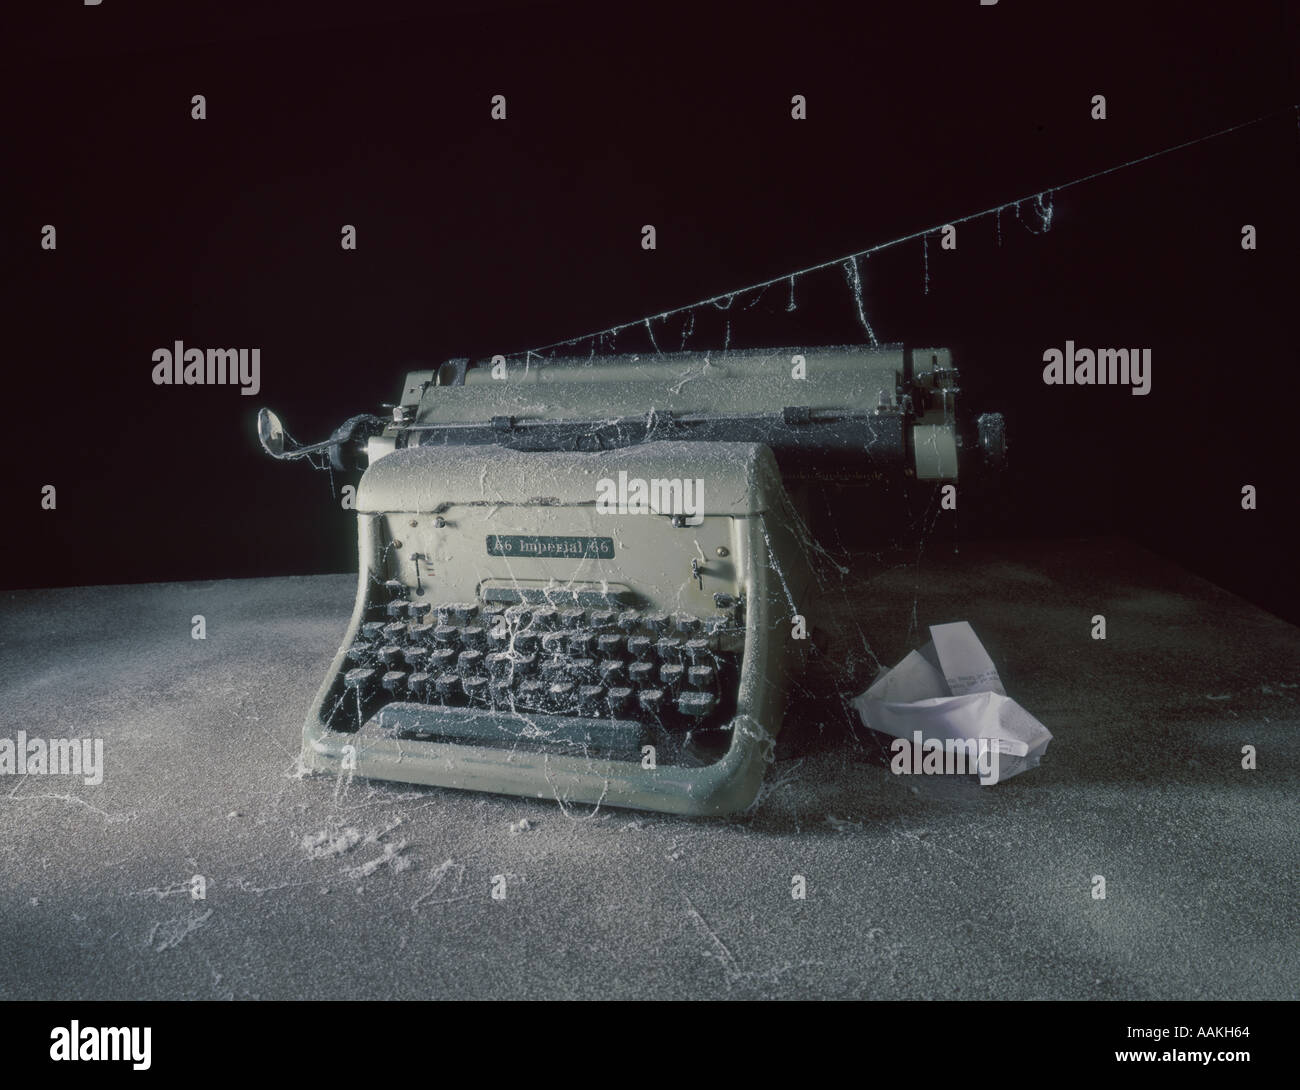 Old typewriter covered with cobwebs Stock Photo - Alamy